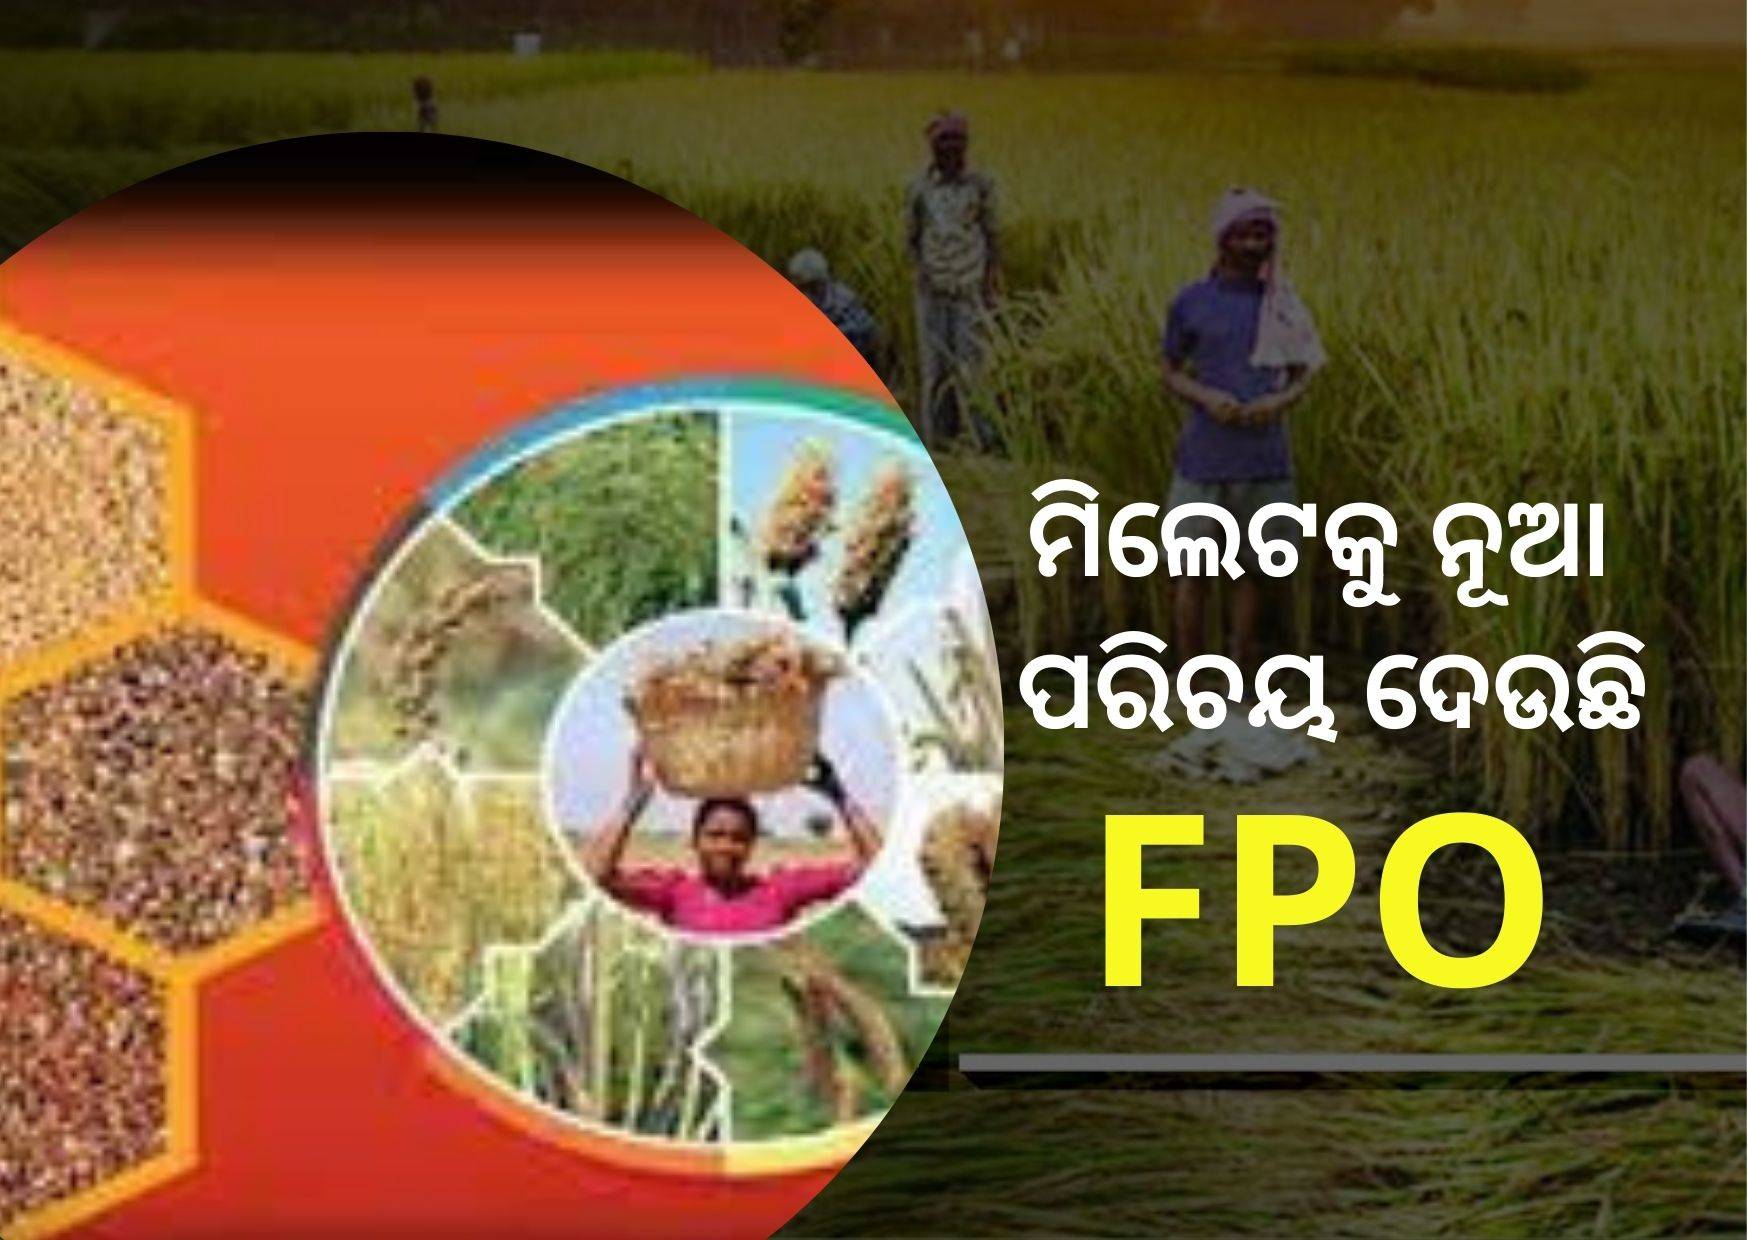 Karnataka based FPO resulted in a long-term change in the lifestyle of the farmers